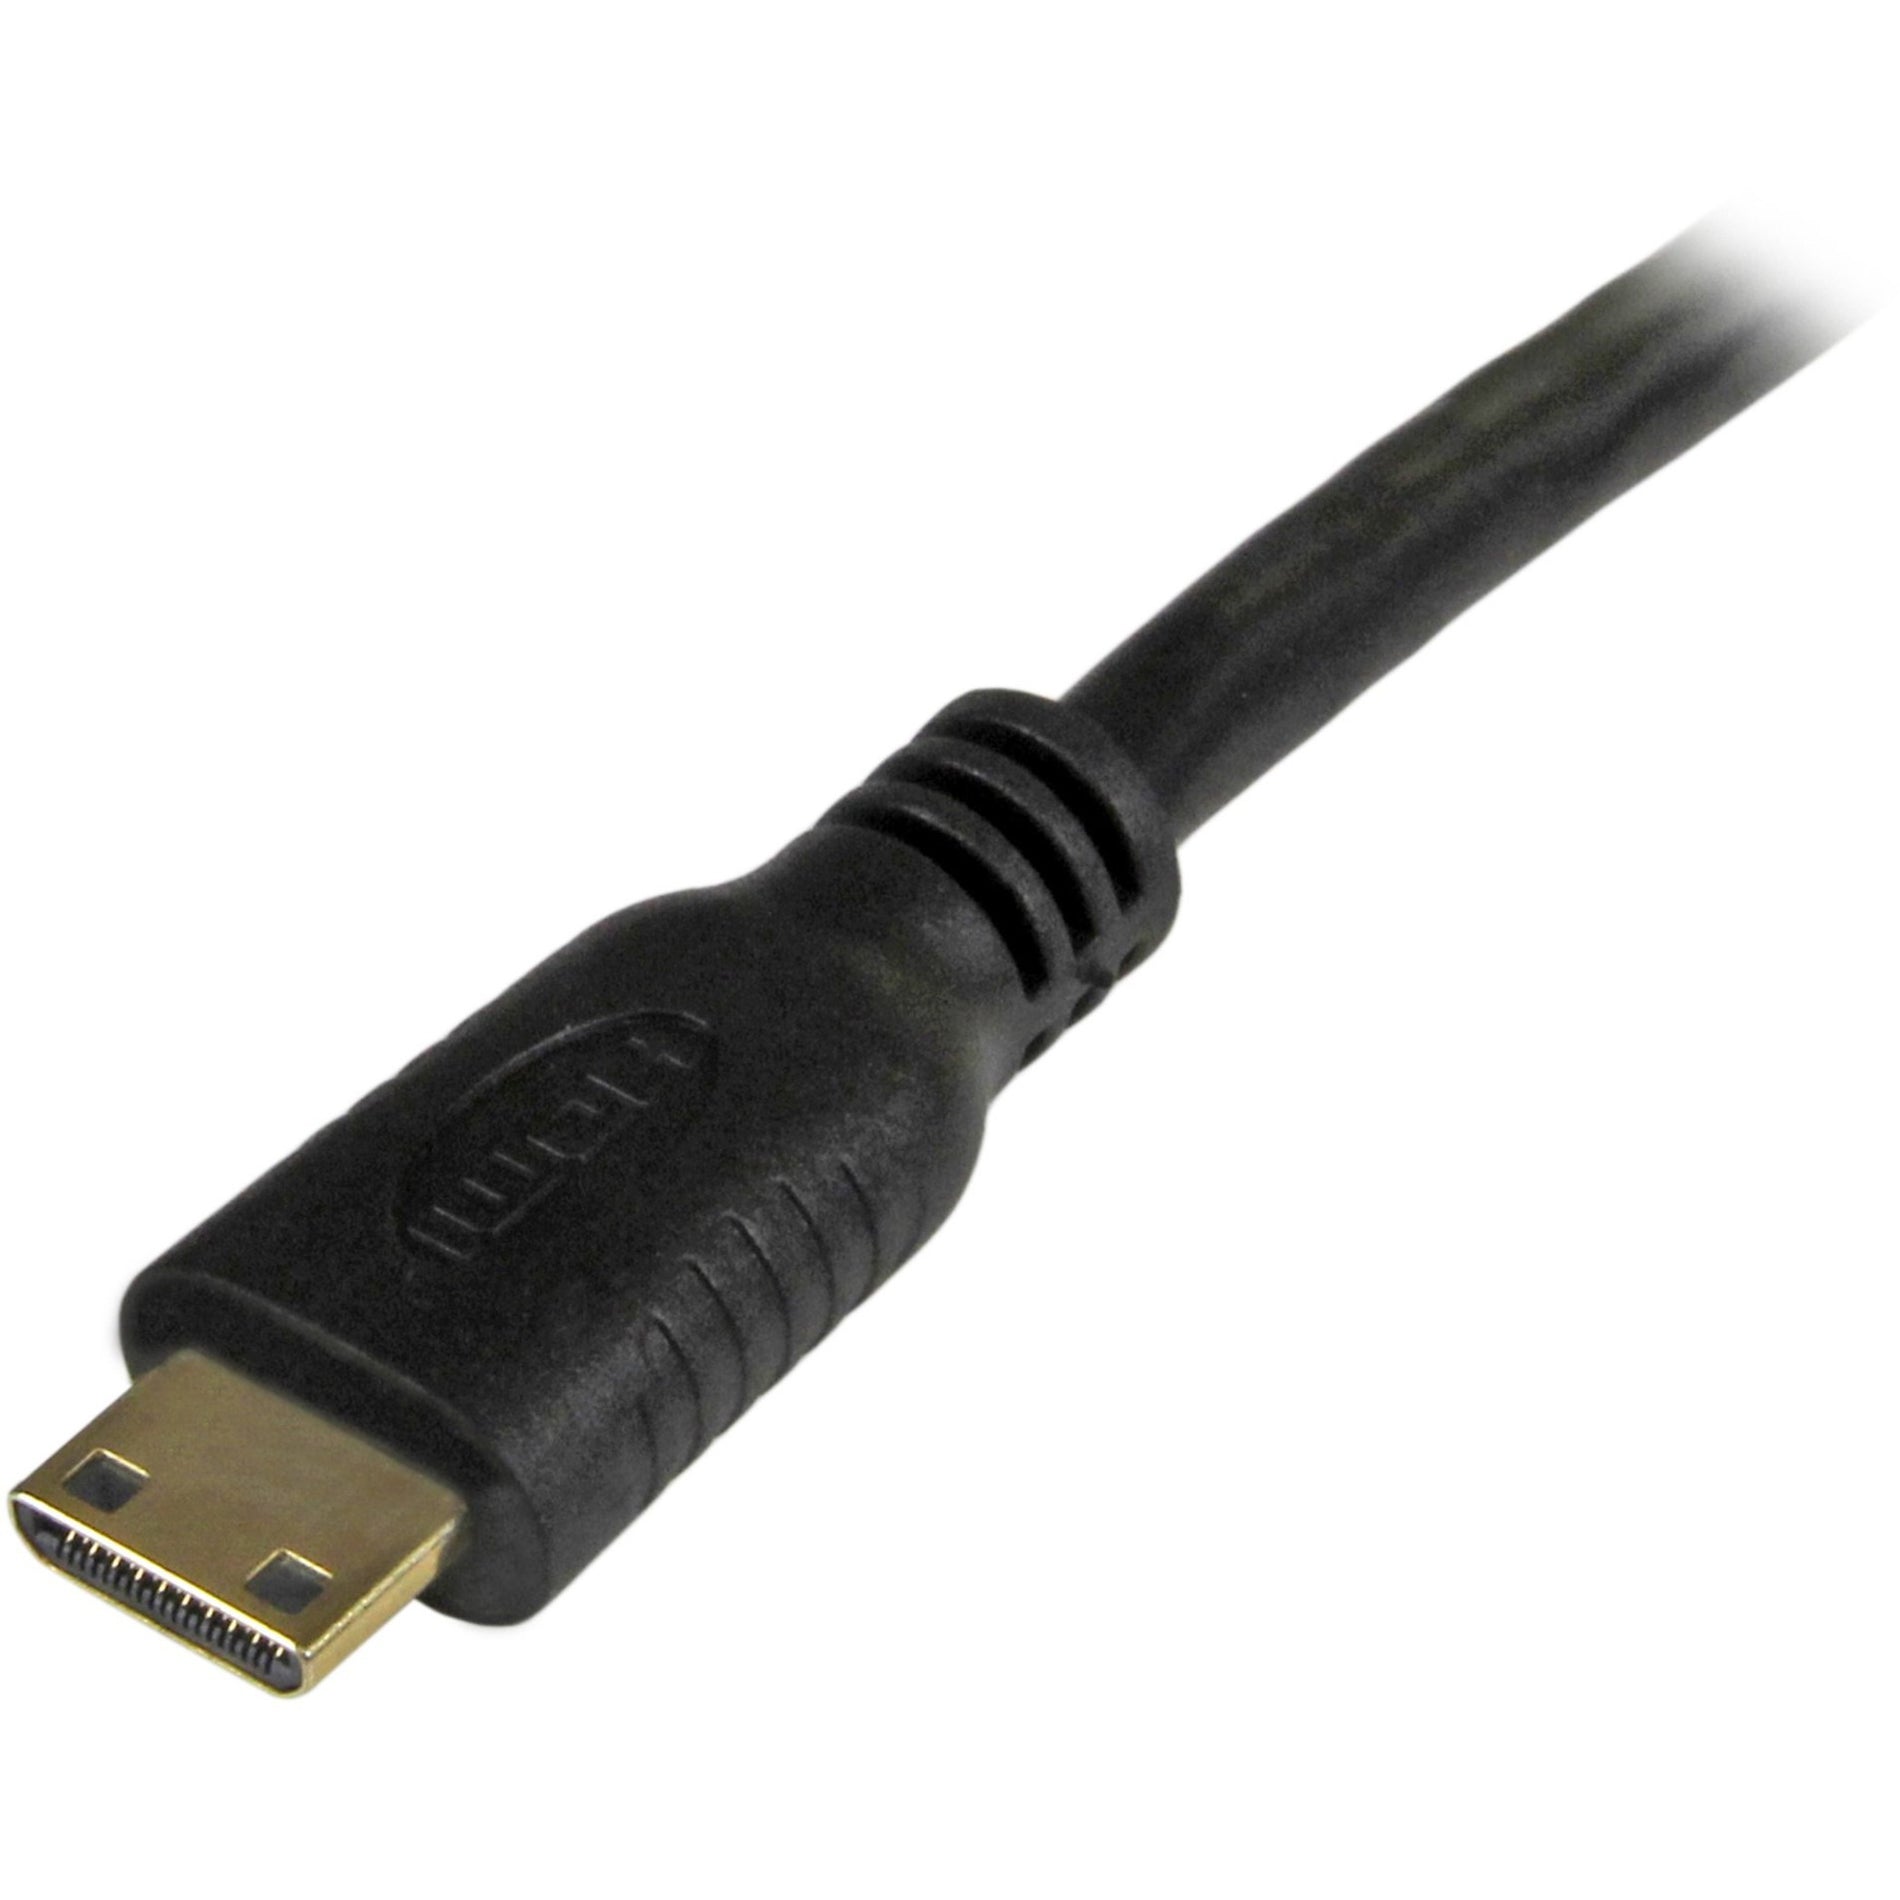 StarTech.com HDMIACMM6 6 ft High Speed HDMI Cable with Ethernet- HDMI to HDMI Mini- M/M, Compact and Portable Video Cable Adapter